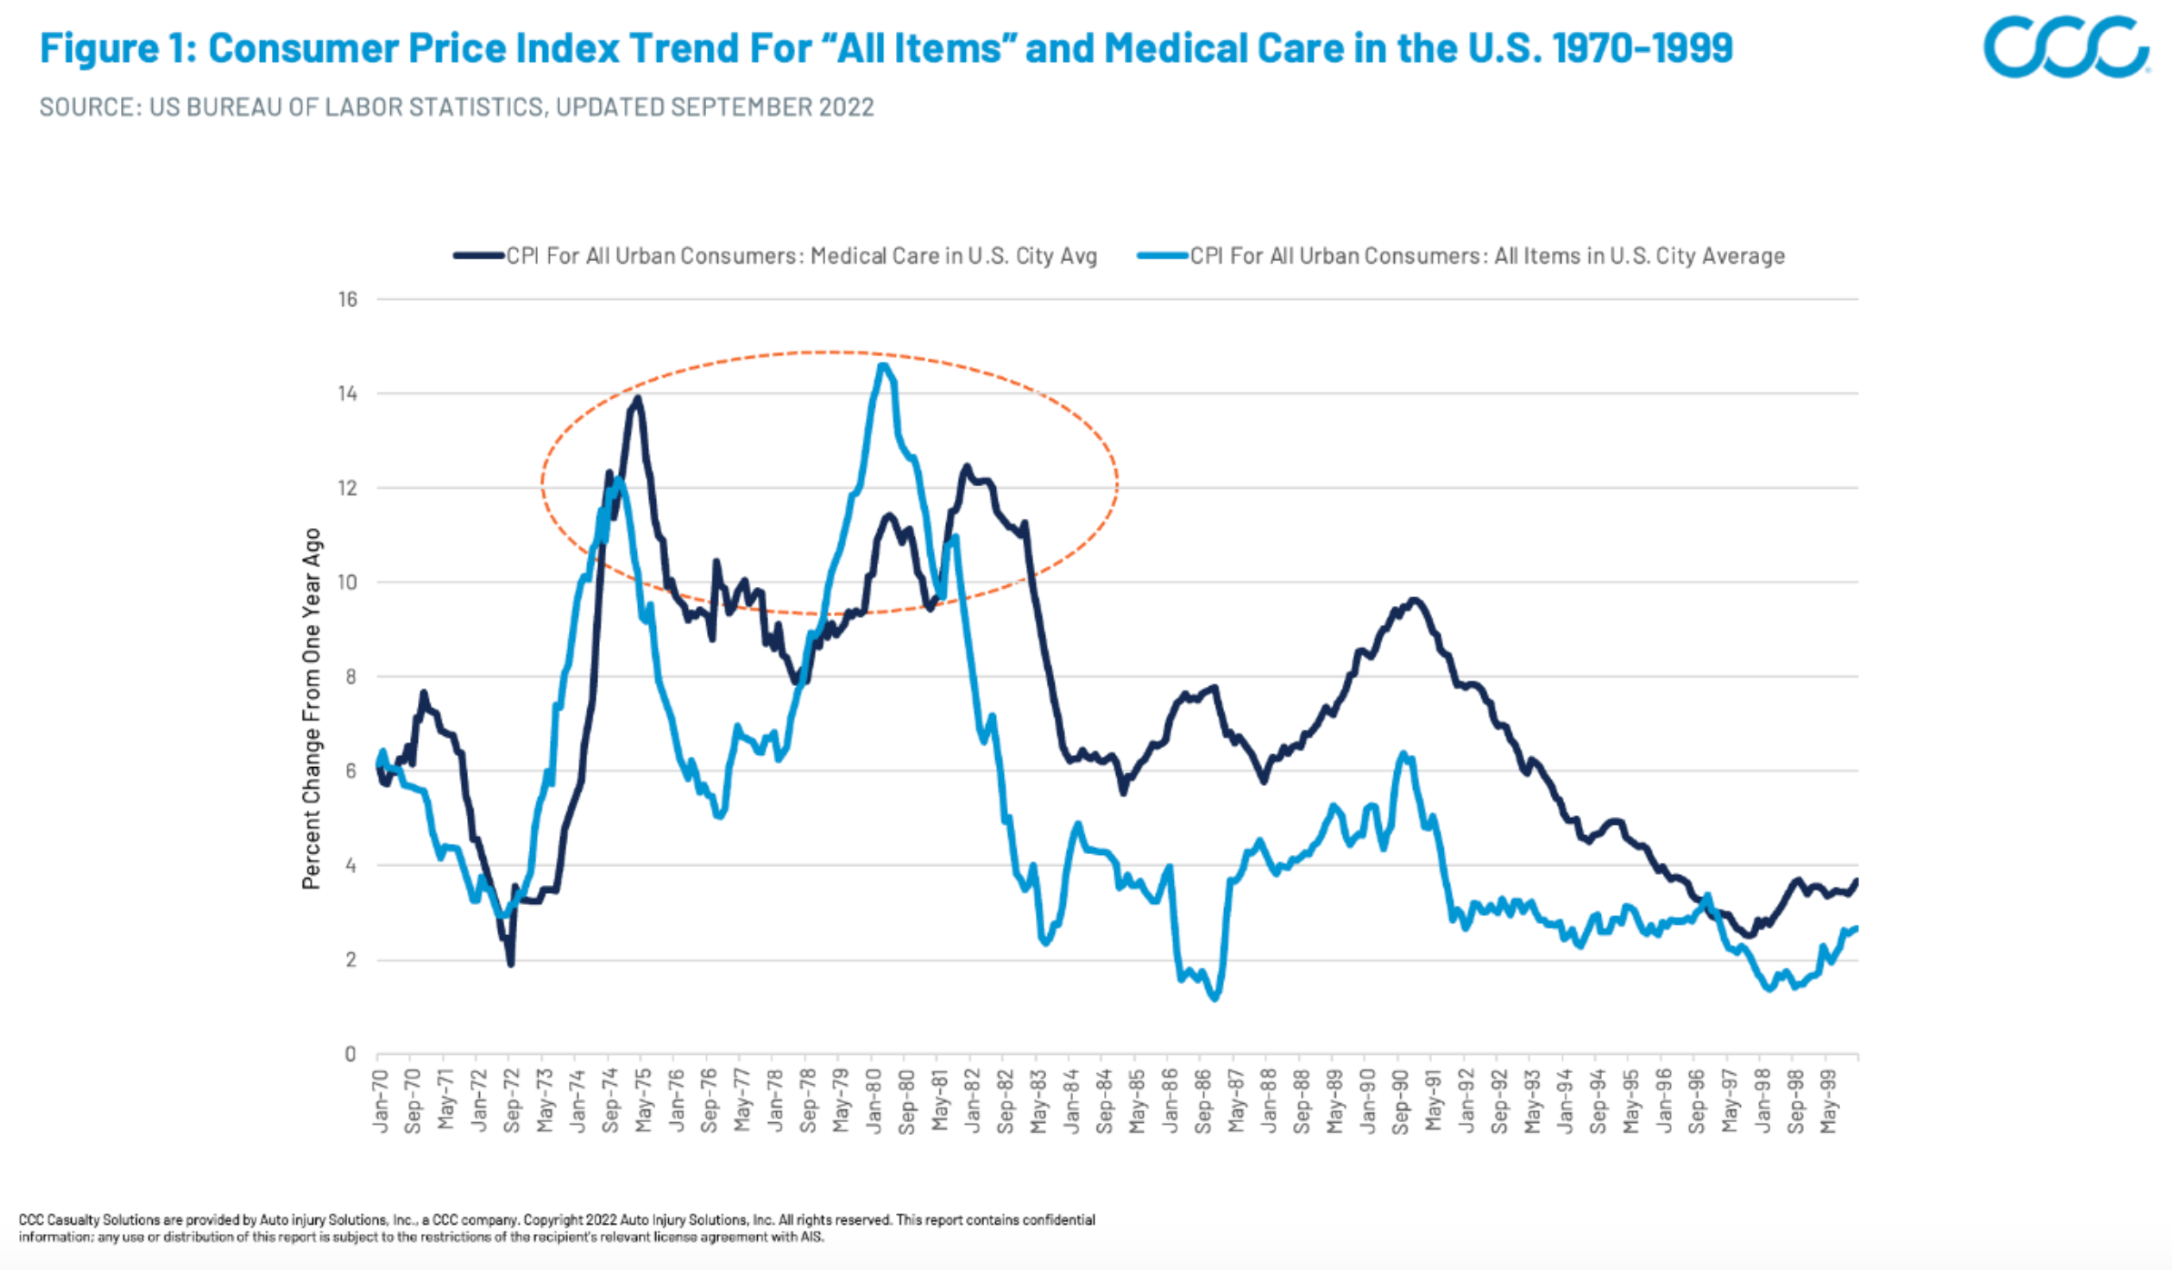 Consumer Price Index Trend for All Items and Medical Care in the U.S.